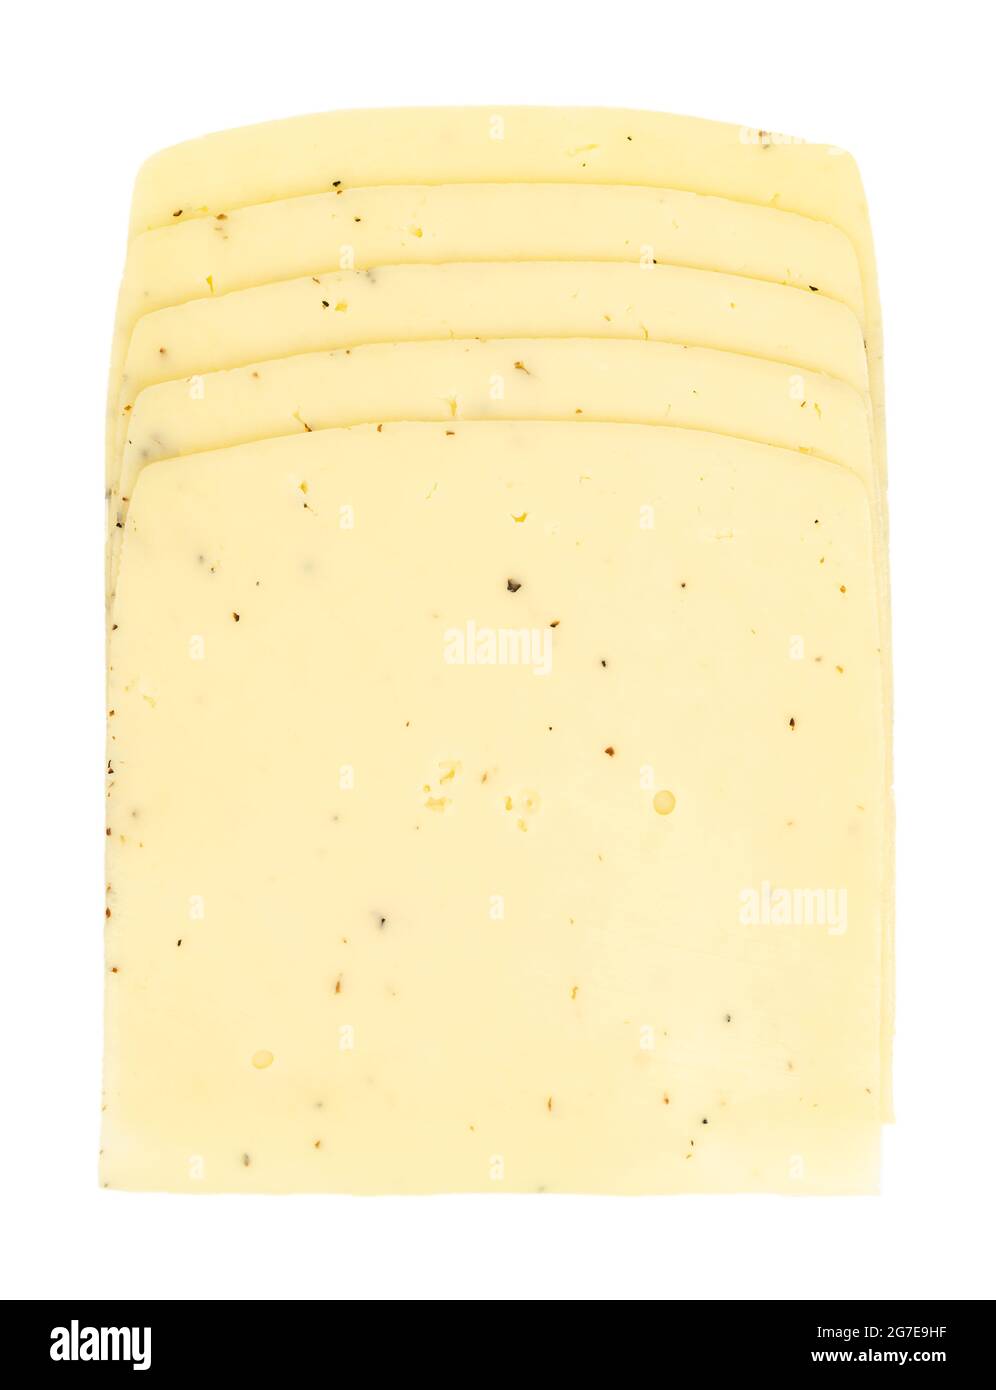 Truffle cheese slices. Stack of sliced cheddar for cheeseburgers, made of pasteurized cow milk, and truffle flakes. Dairy product. Light yellow. Stock Photo